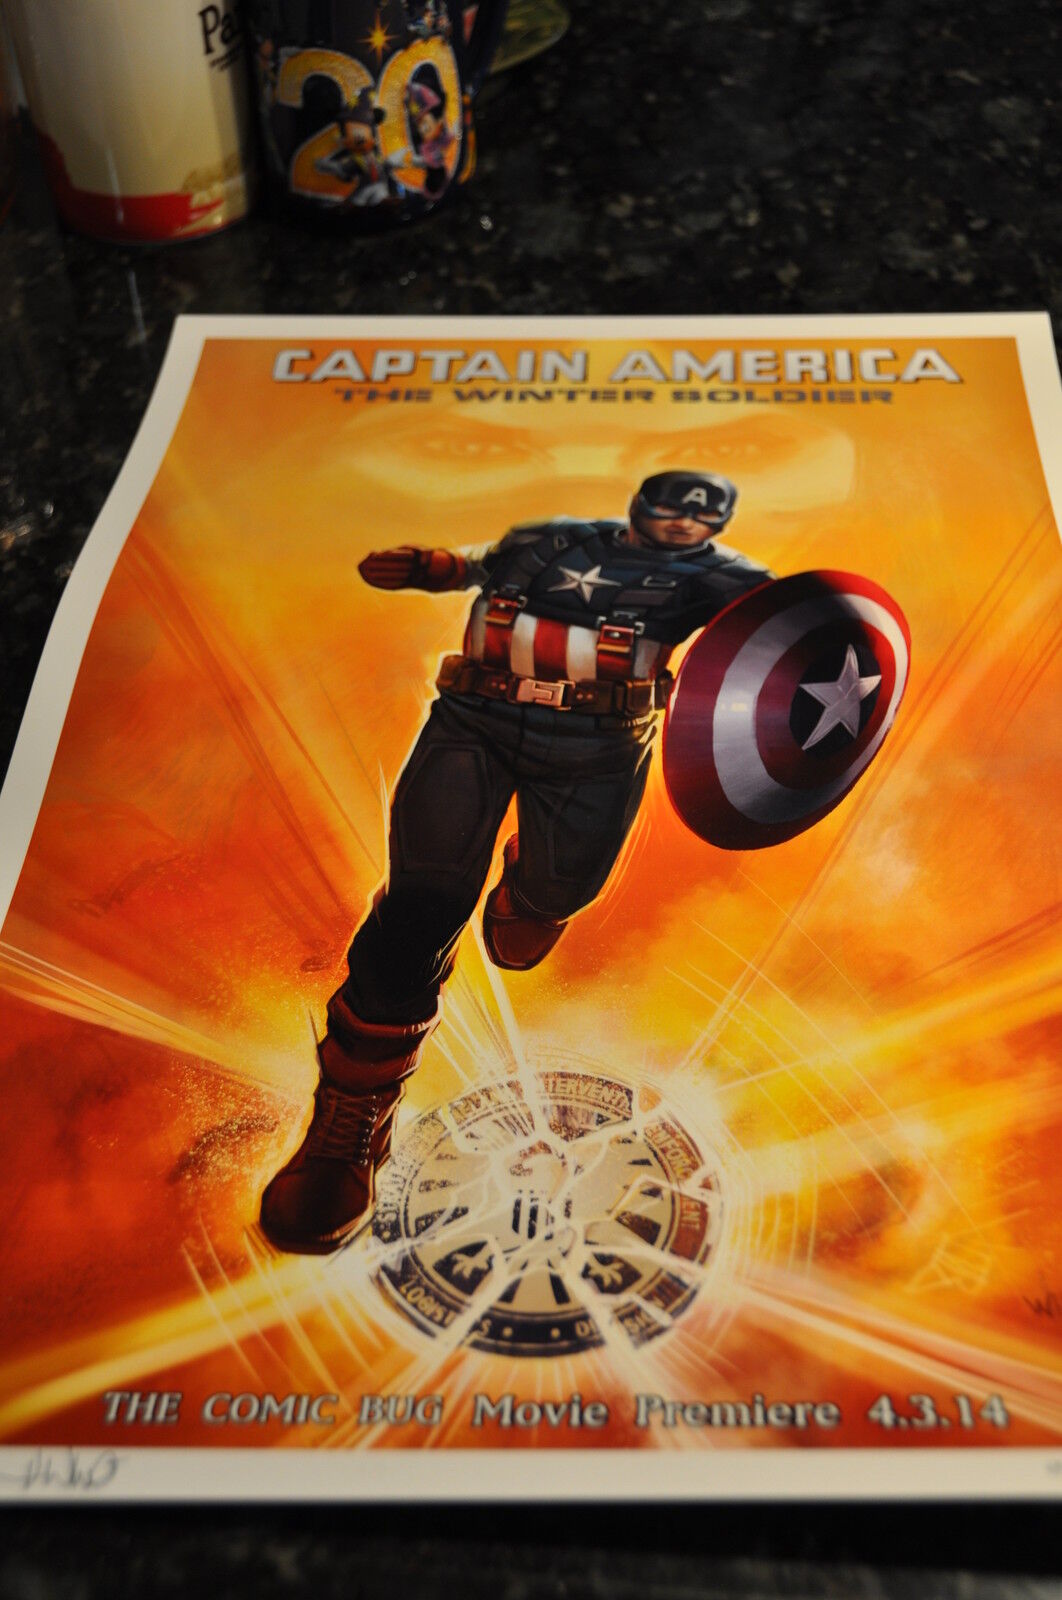 MARVEL CAPTAIN AMERICA WINTER SOLDIER MOVIE PREMIERE LE #30 OF 100 POSTER SIGNED